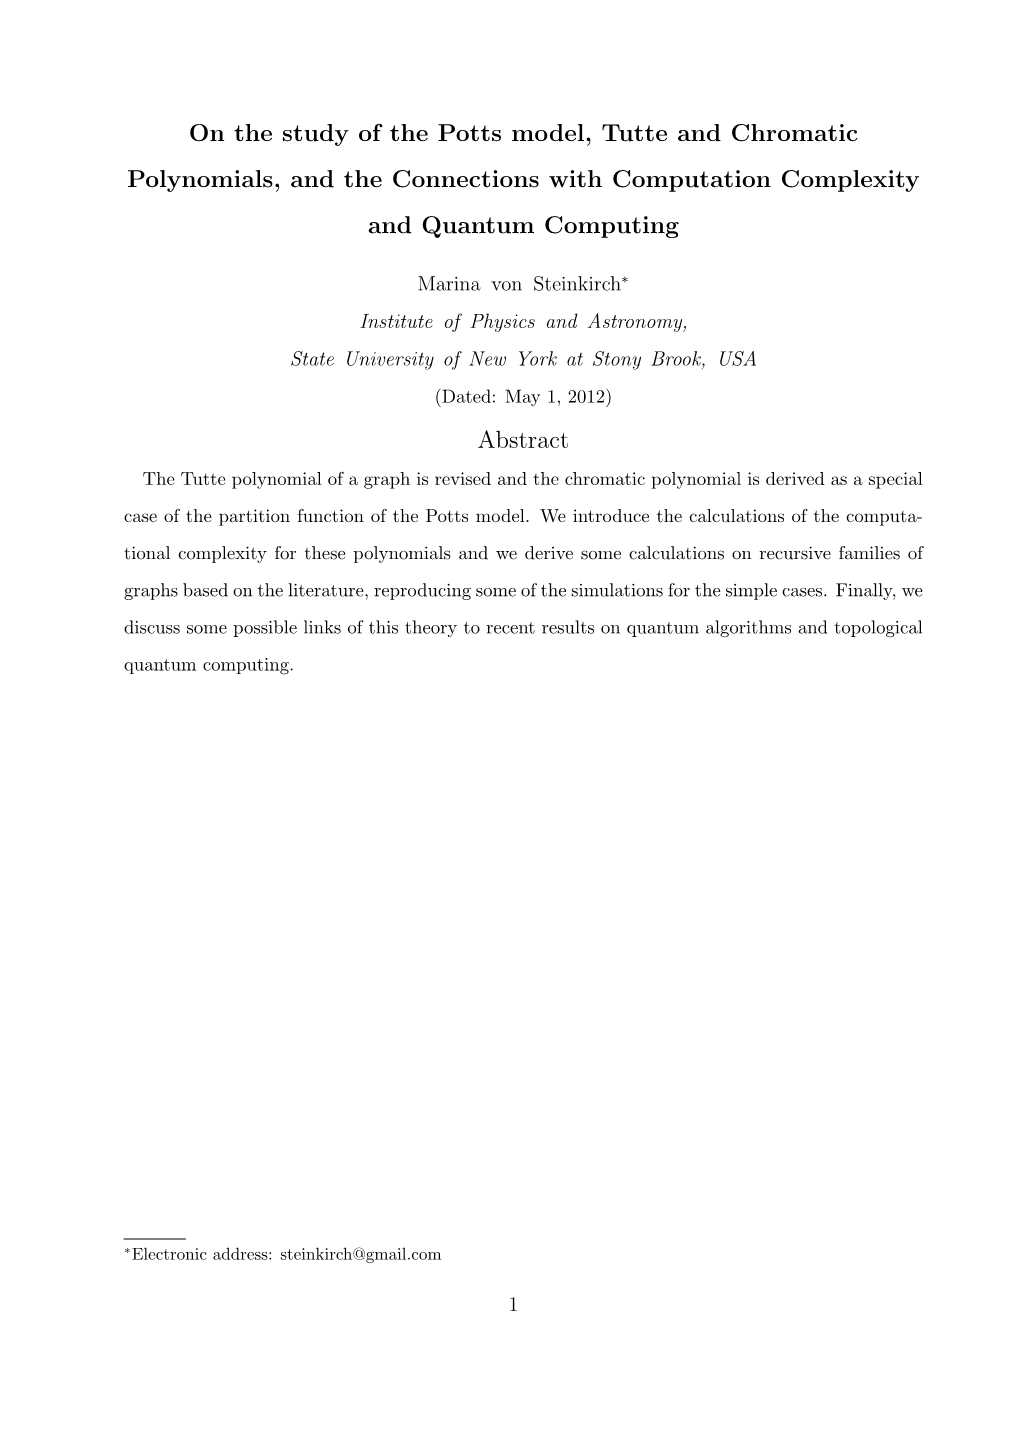 On the Study of the Potts Model, Tutte and Chromatic Polynomials, and the Connections with Computation Complexity and Quantum Computing